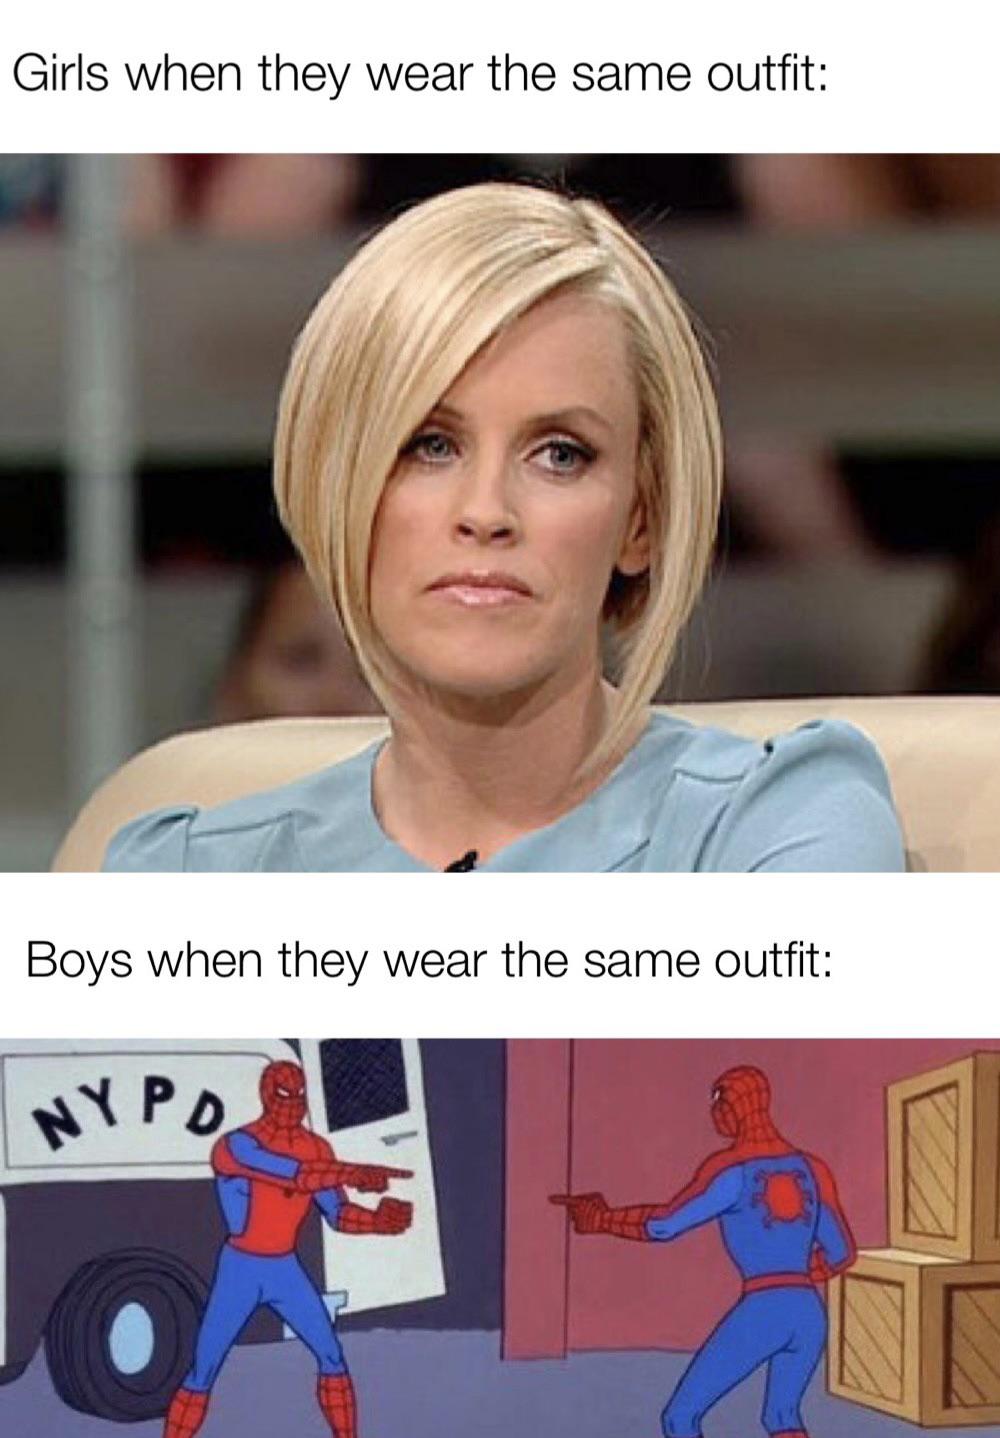 funny memes and pics  - blond - Girls when they wear the same outfit Boys when they wear the same outfit Nypd